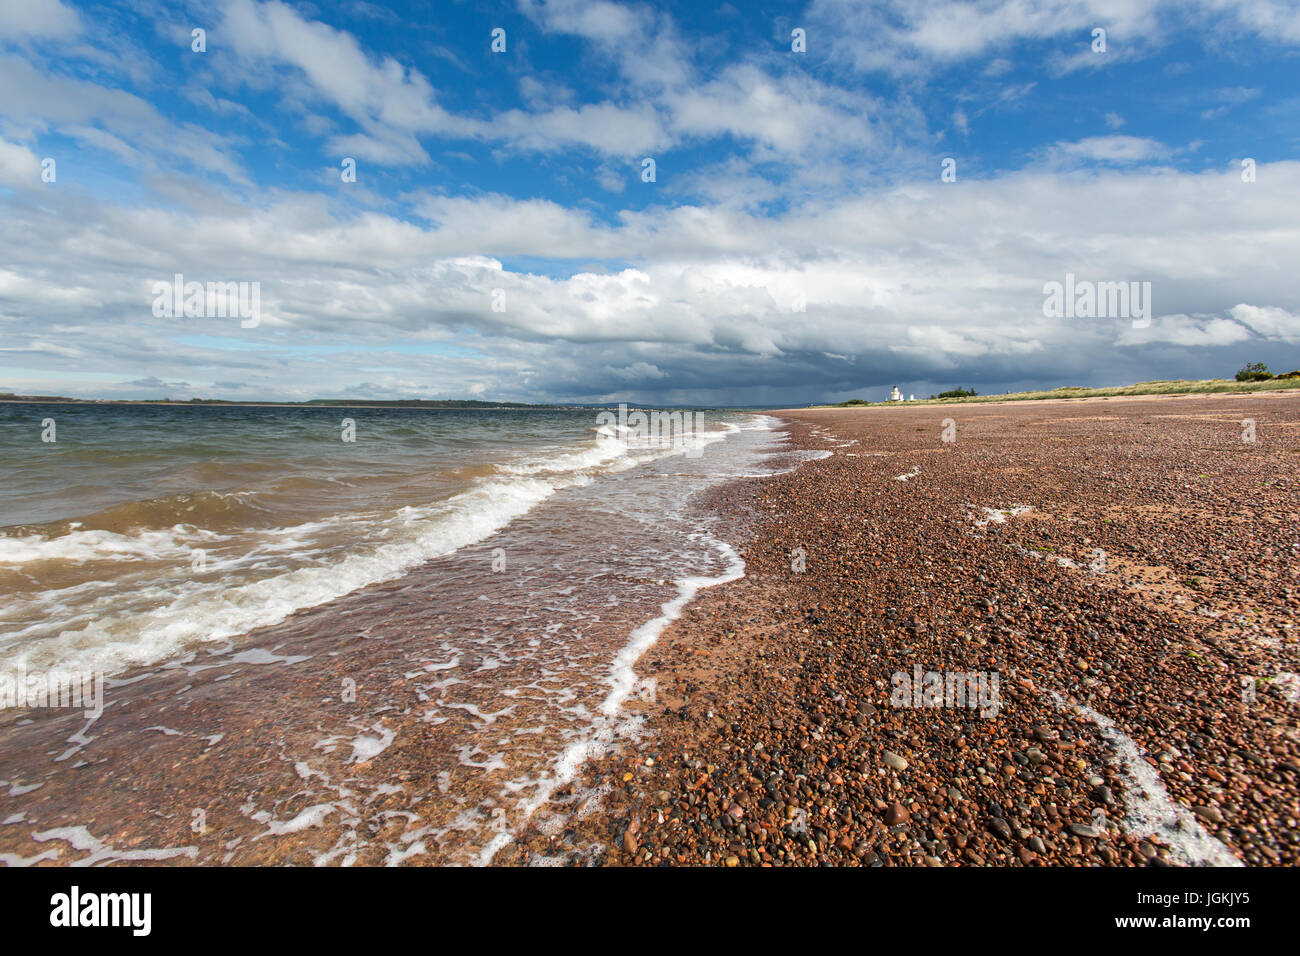 Town of Fortrose, Scotland. Picturesque view of the Rosemarkie Bay beach with Chanonry Point Lighthouse in the background. Stock Photo